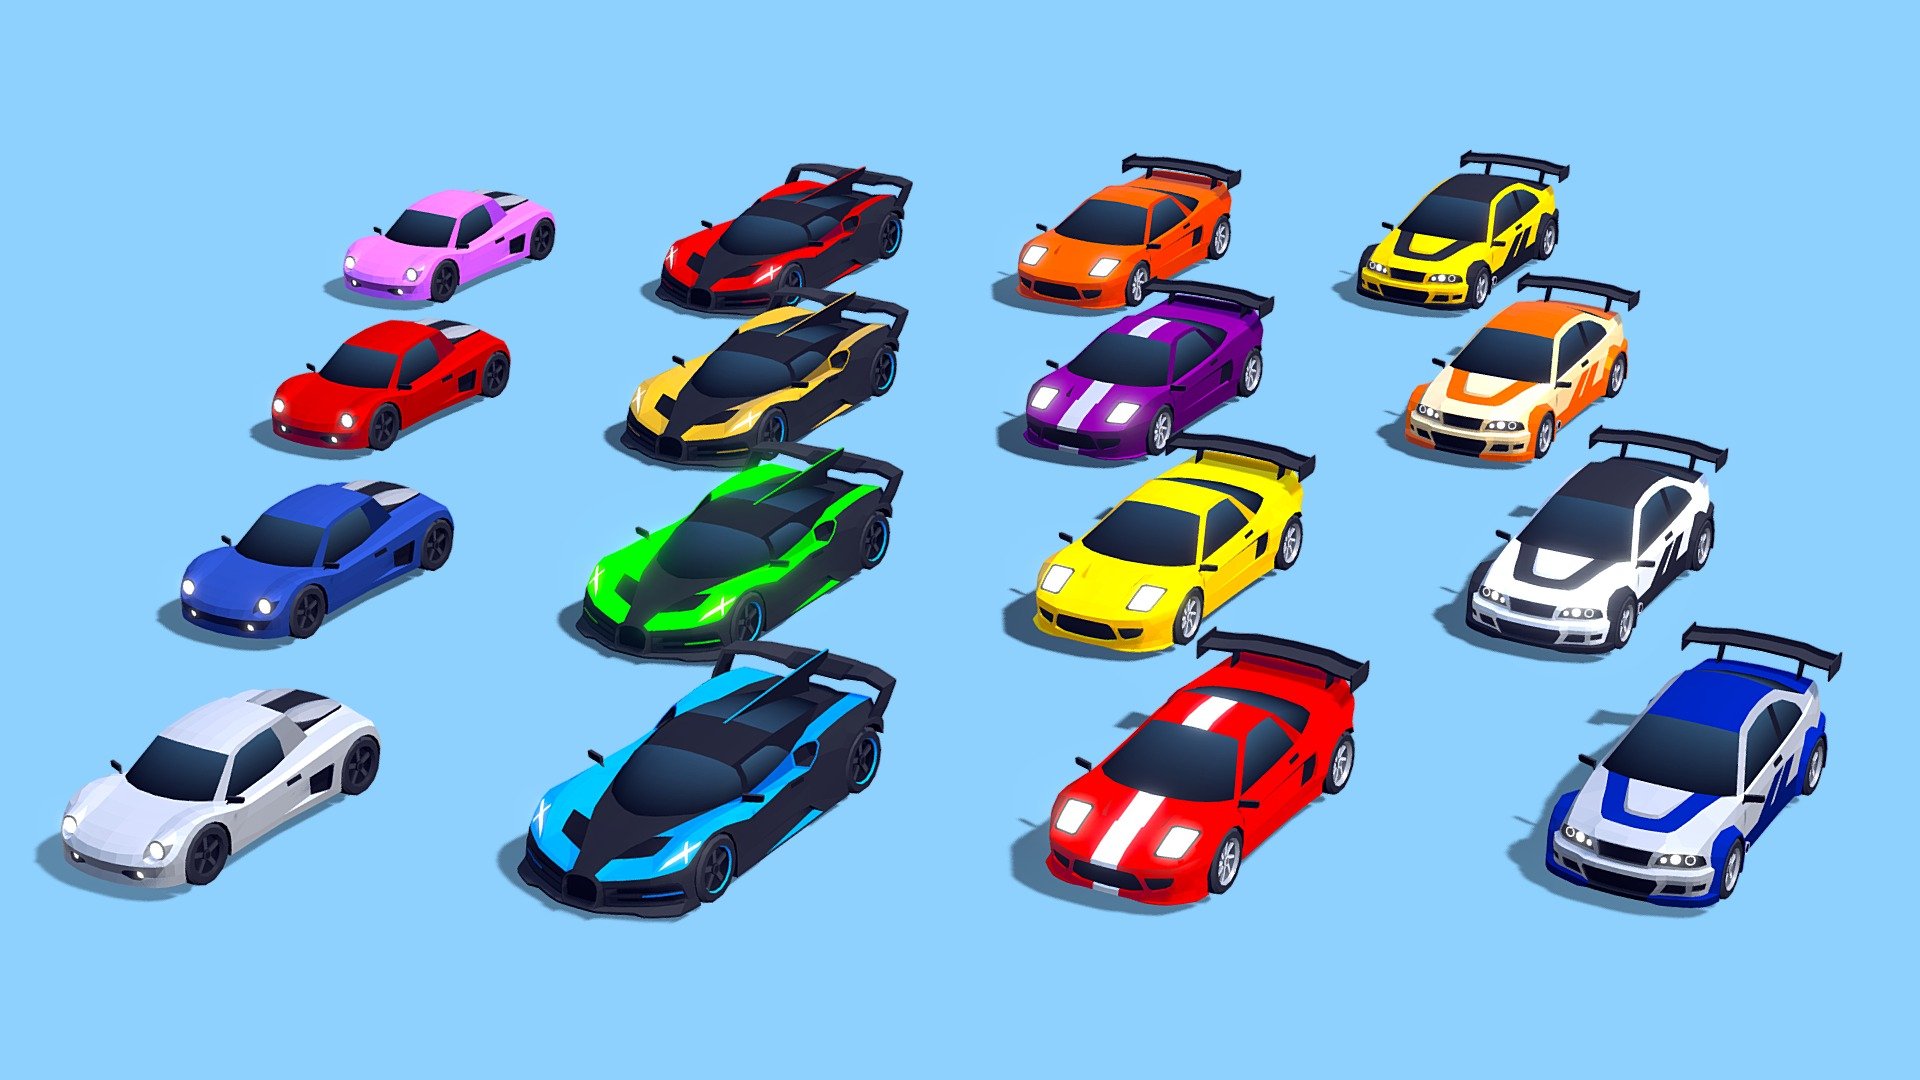 Hello!, this is the March update (2023.3) of Low Poly Cars - Mega Pack, which is available in the Unity Asset Store and Sketchfab. This update will be launched on March 9th.

It includes 4 new cars: Bugatti Bolide (Laplace), BMW M3 GTR (Blacklist), Honda NSX Tuned (Edge) and Tommykaira ZZ-S (Kyara).

If you would like to request a vehicle for next updates just write a comment! 3d model